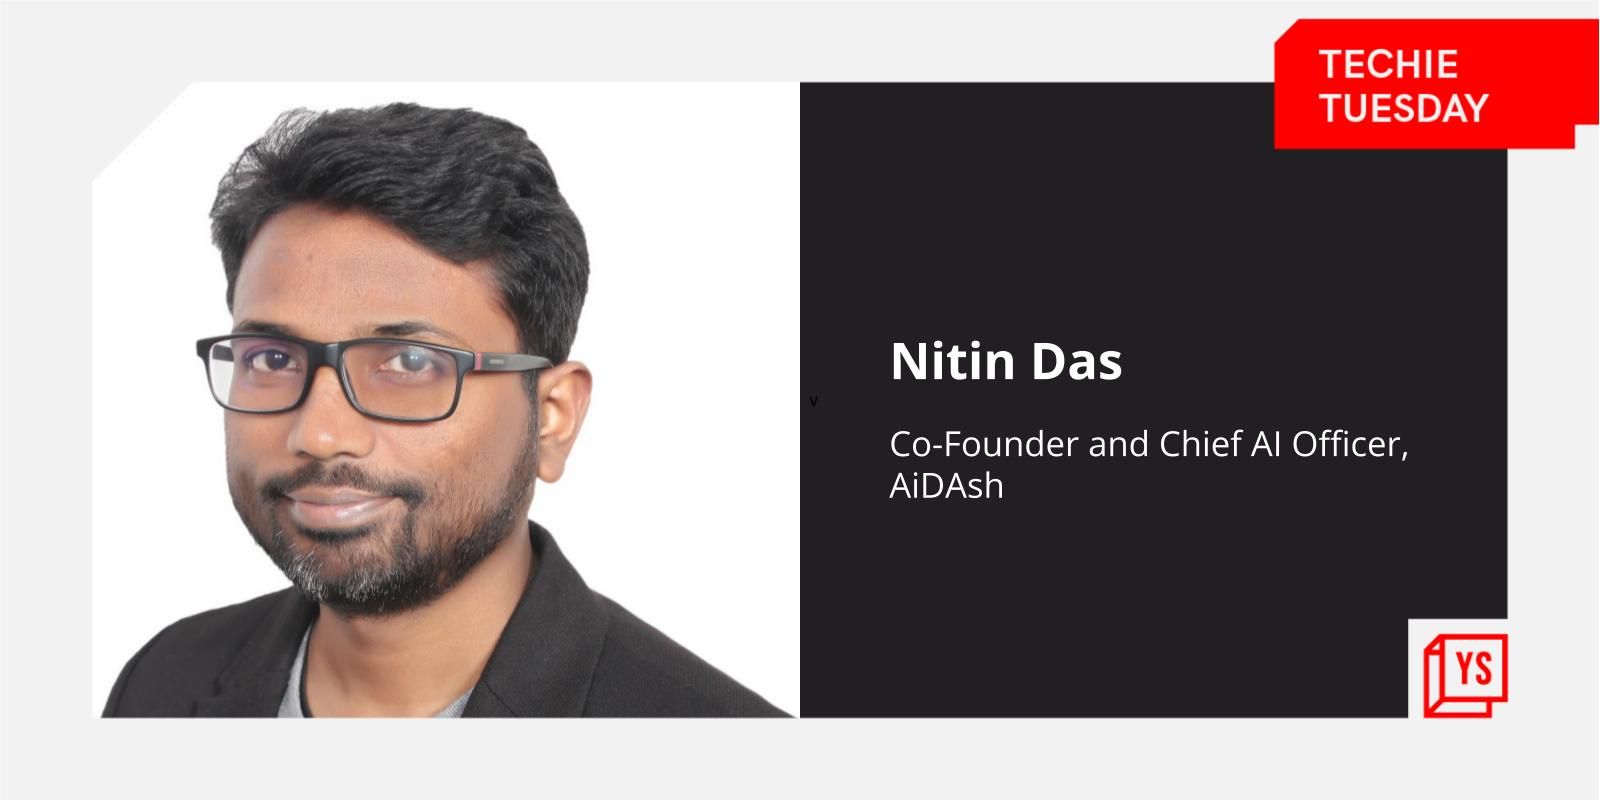 [Techie Tuesday] Meet Nitin Das, who is building teams of AI experts to make industries and businesses more sustainable 